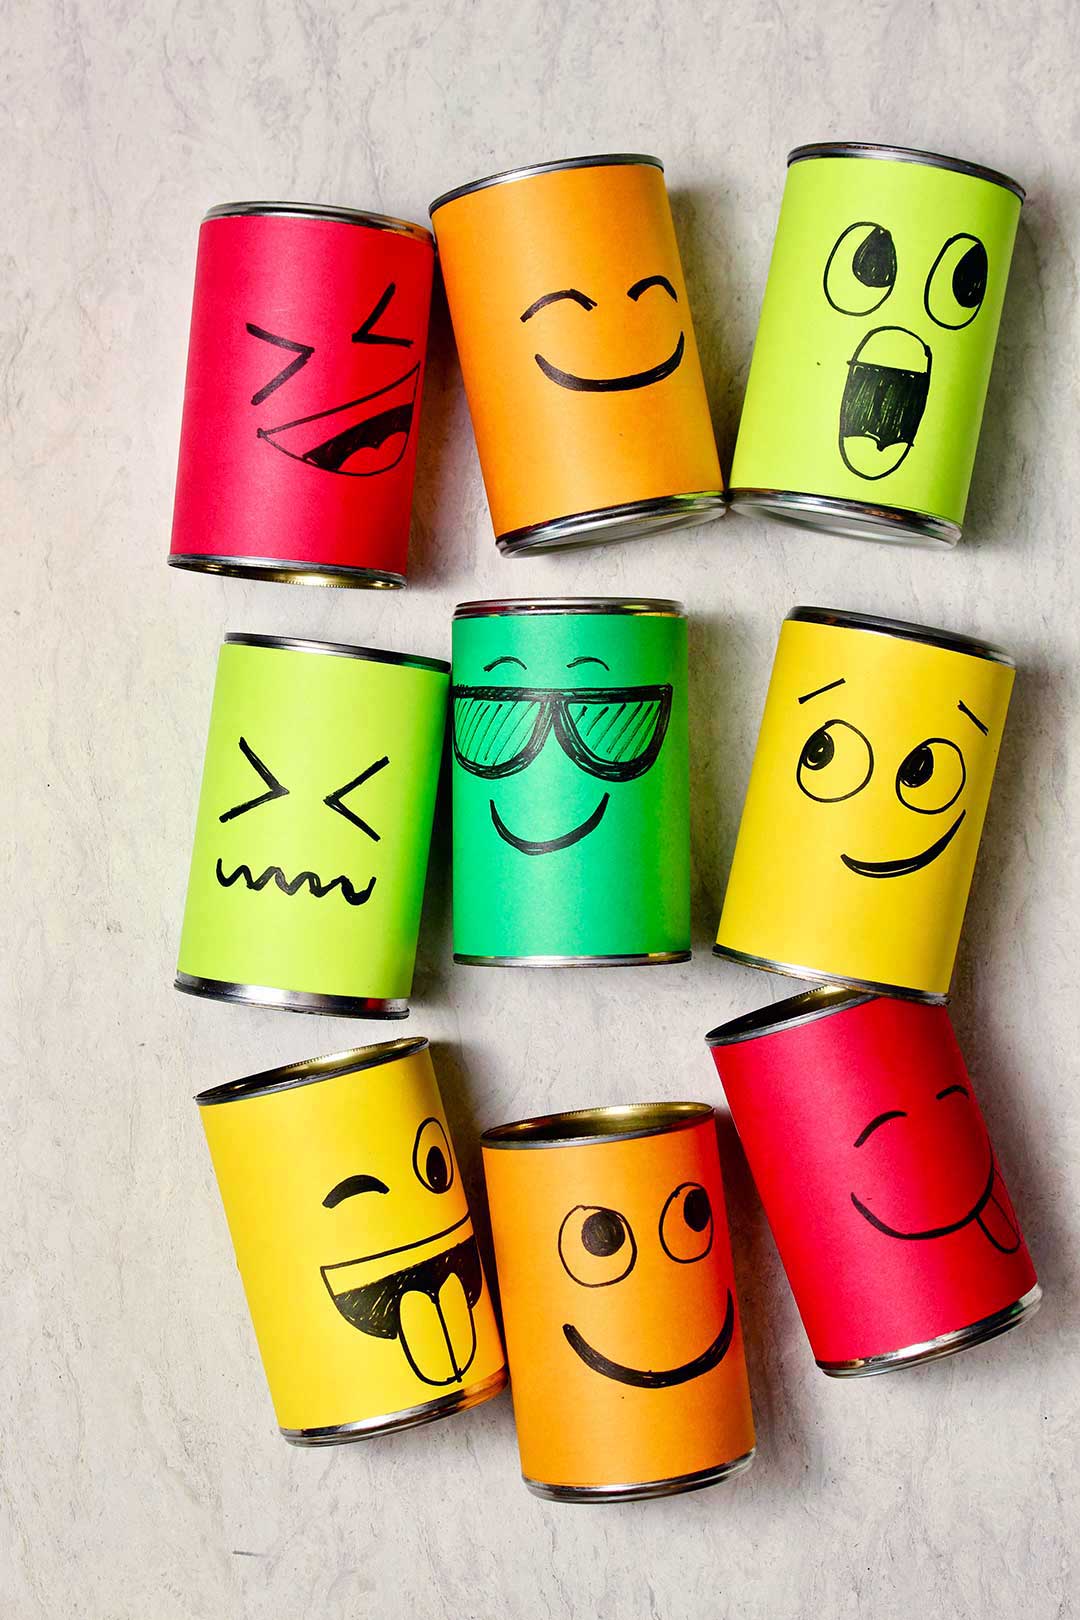 Nine different silly face cans resting on a marble background.